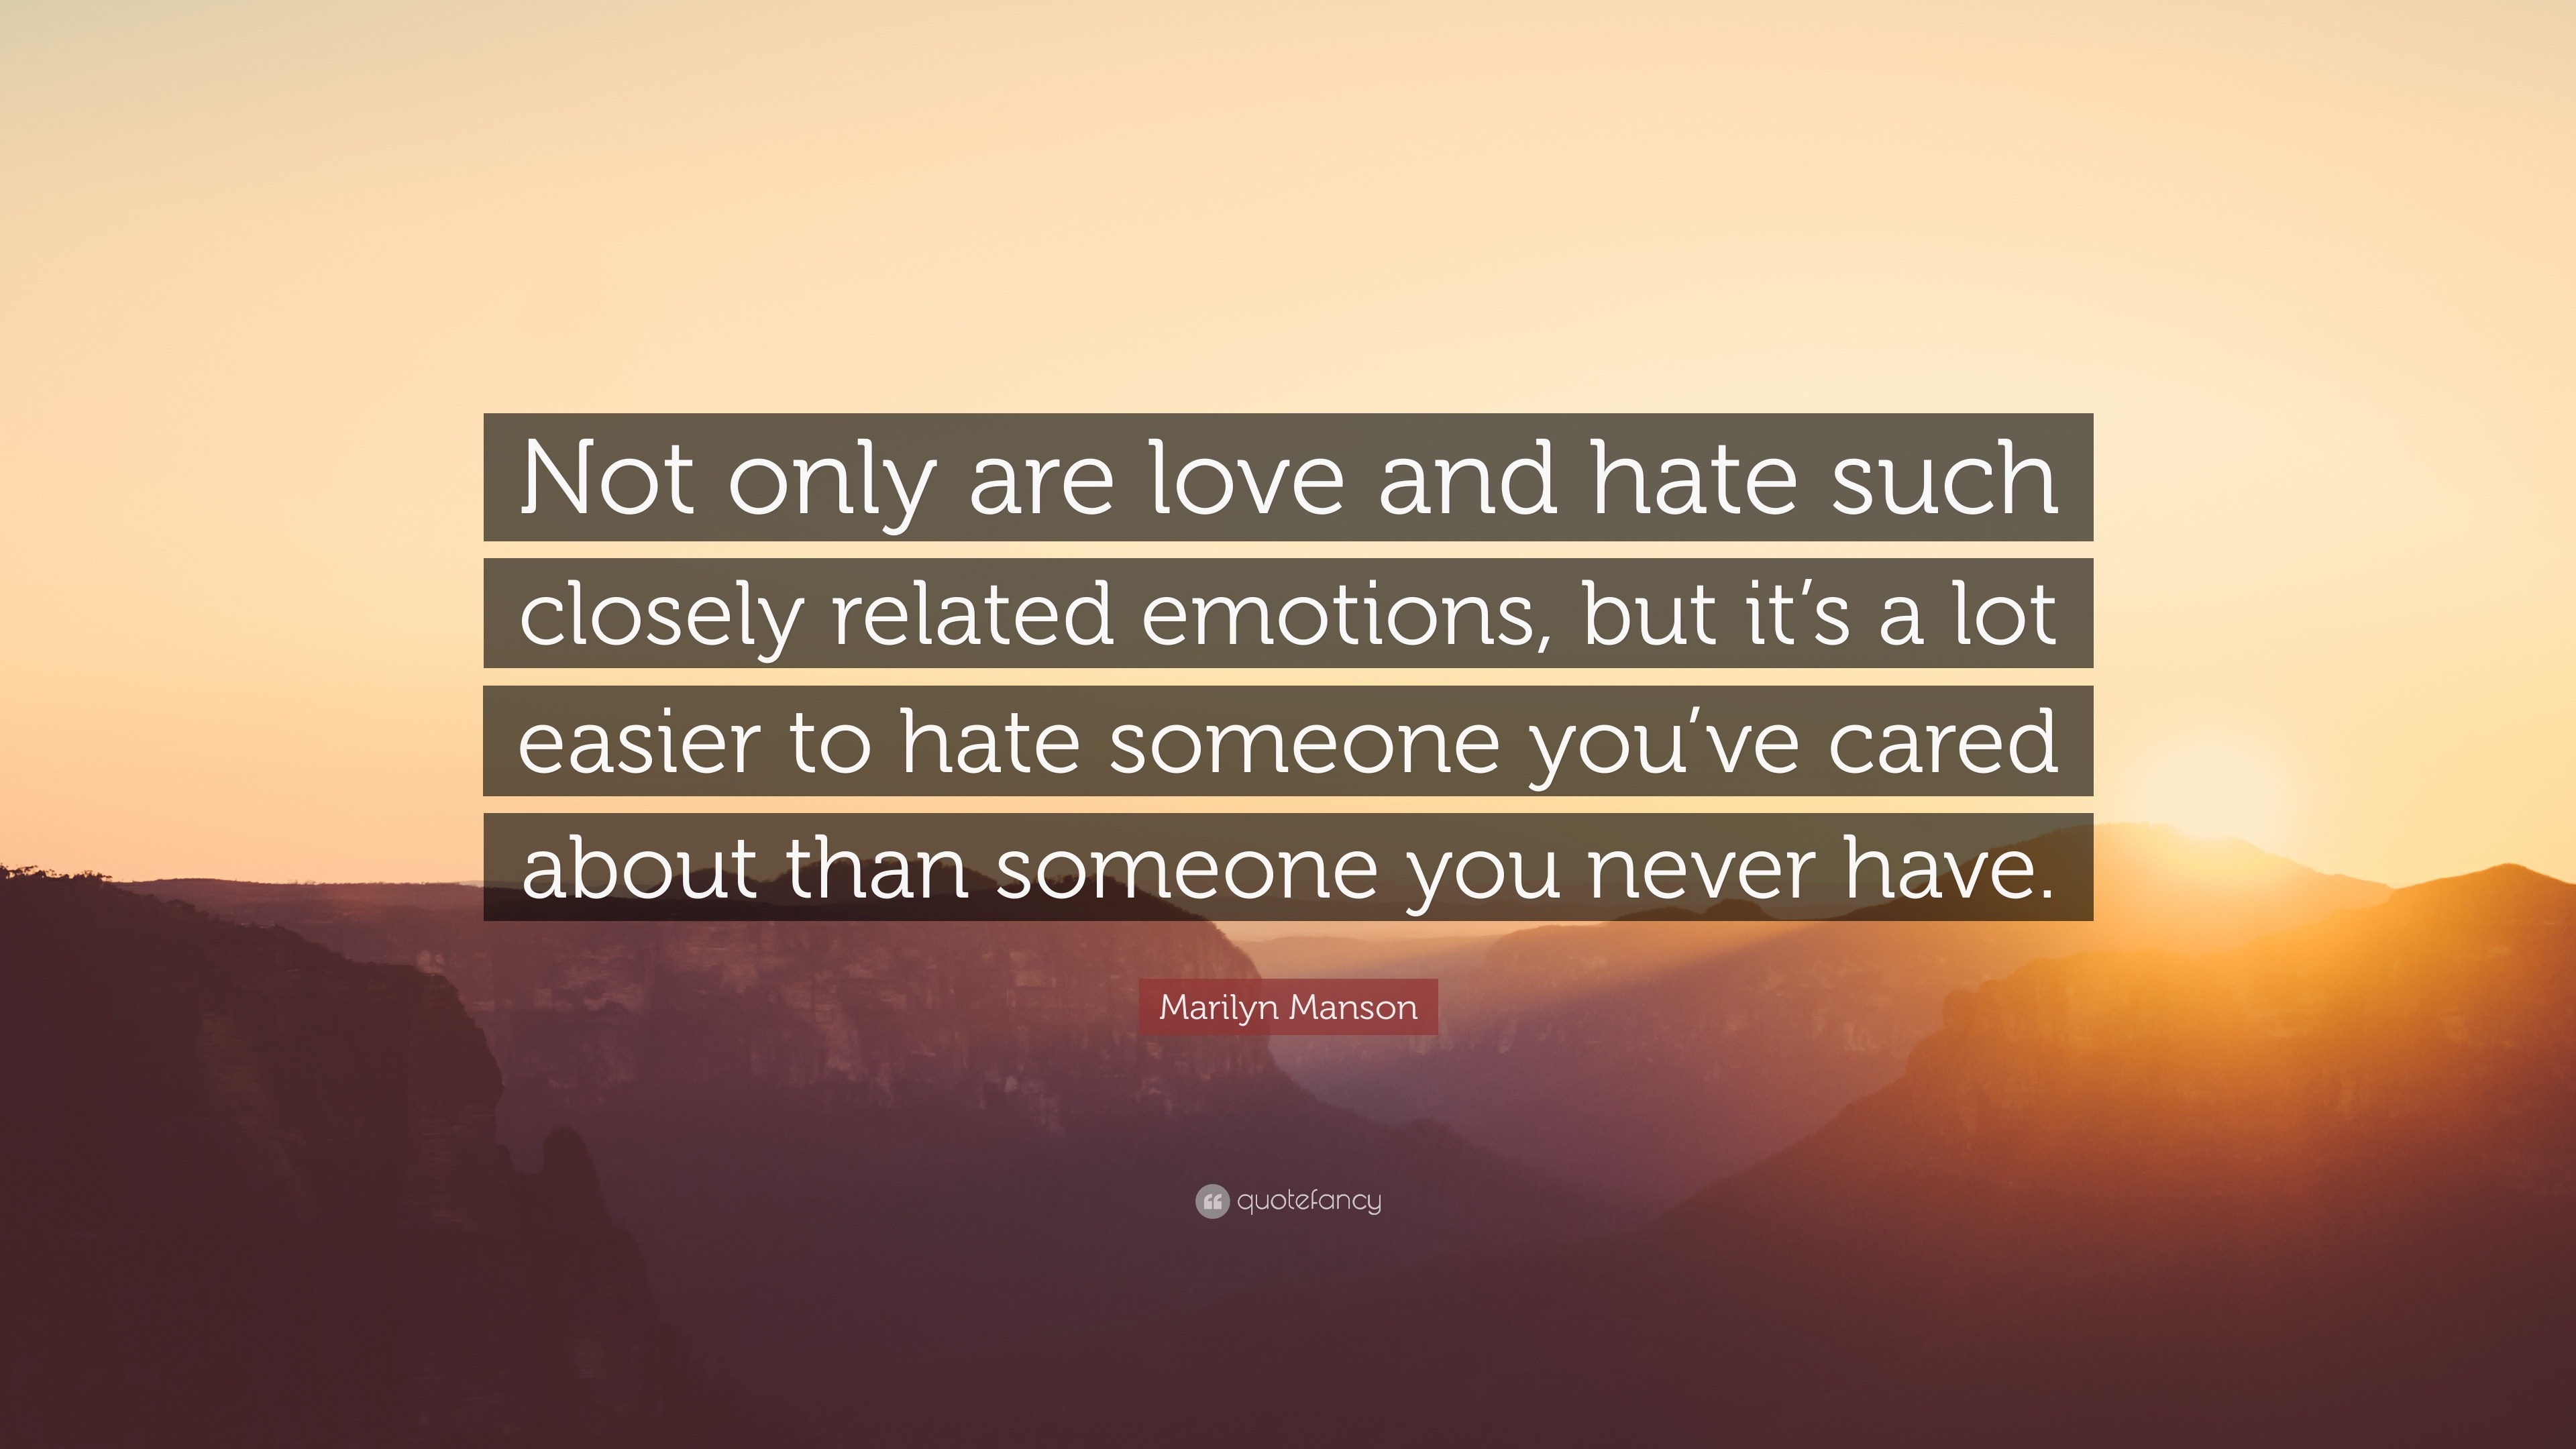 Marilyn Manson Quote “Not only are love and hate such closely emotions